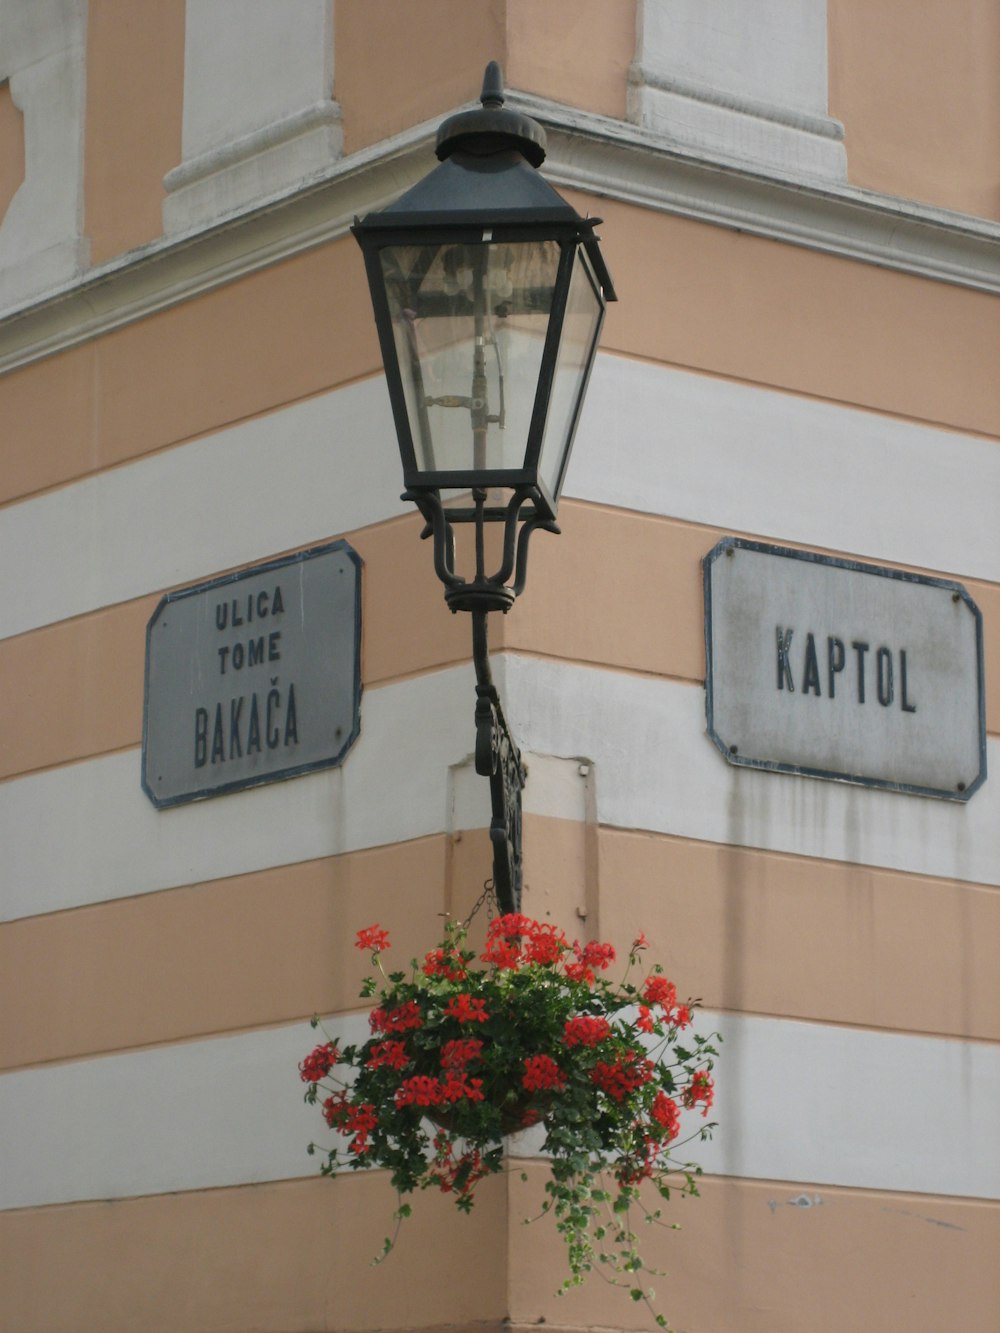 a lamp post with two street signs on it